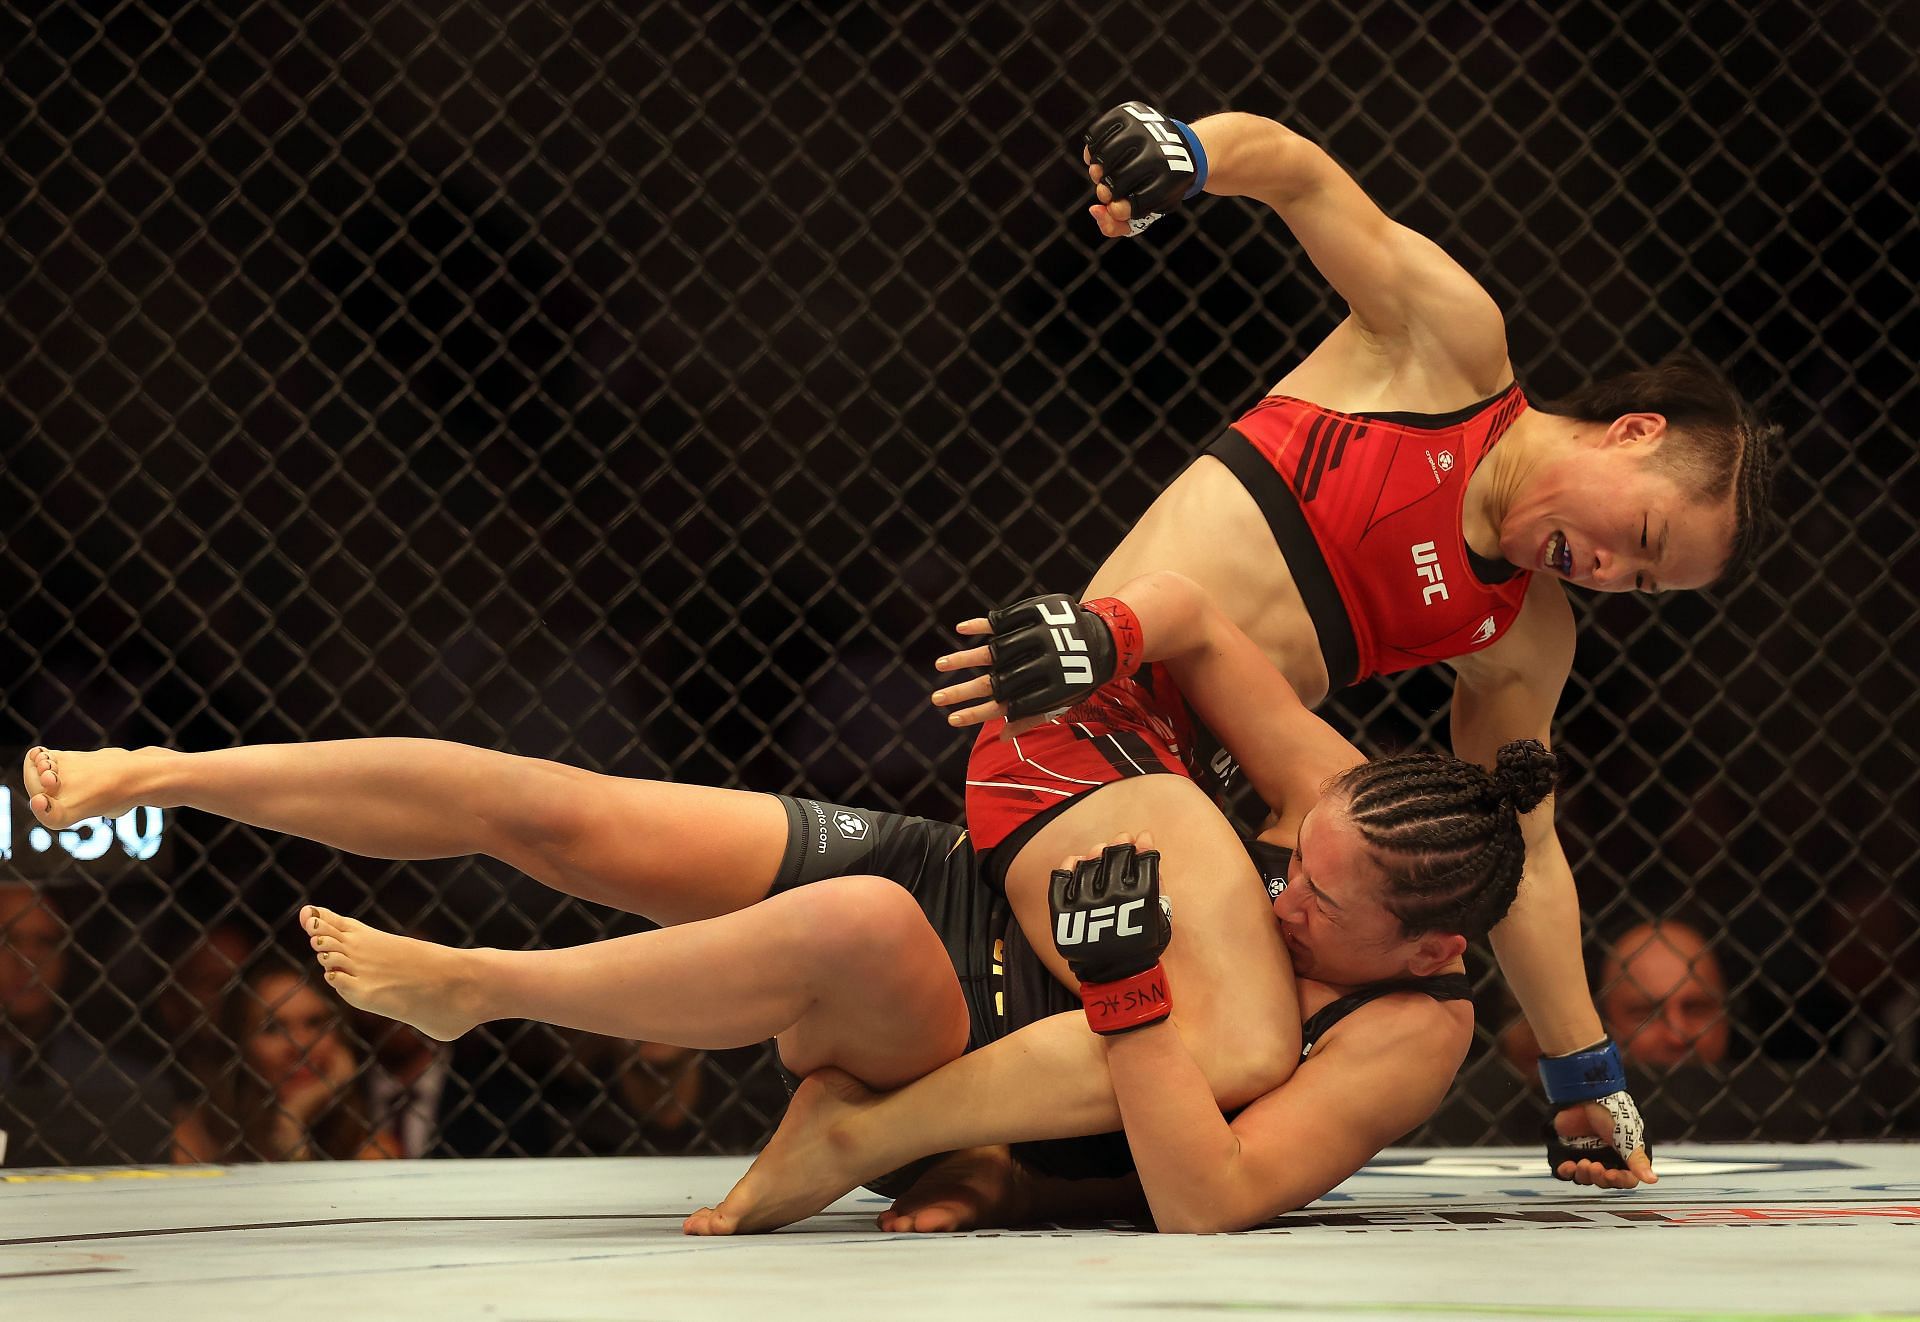 Weili Zhang will be hopeful of retaining her strawweight title this weekend